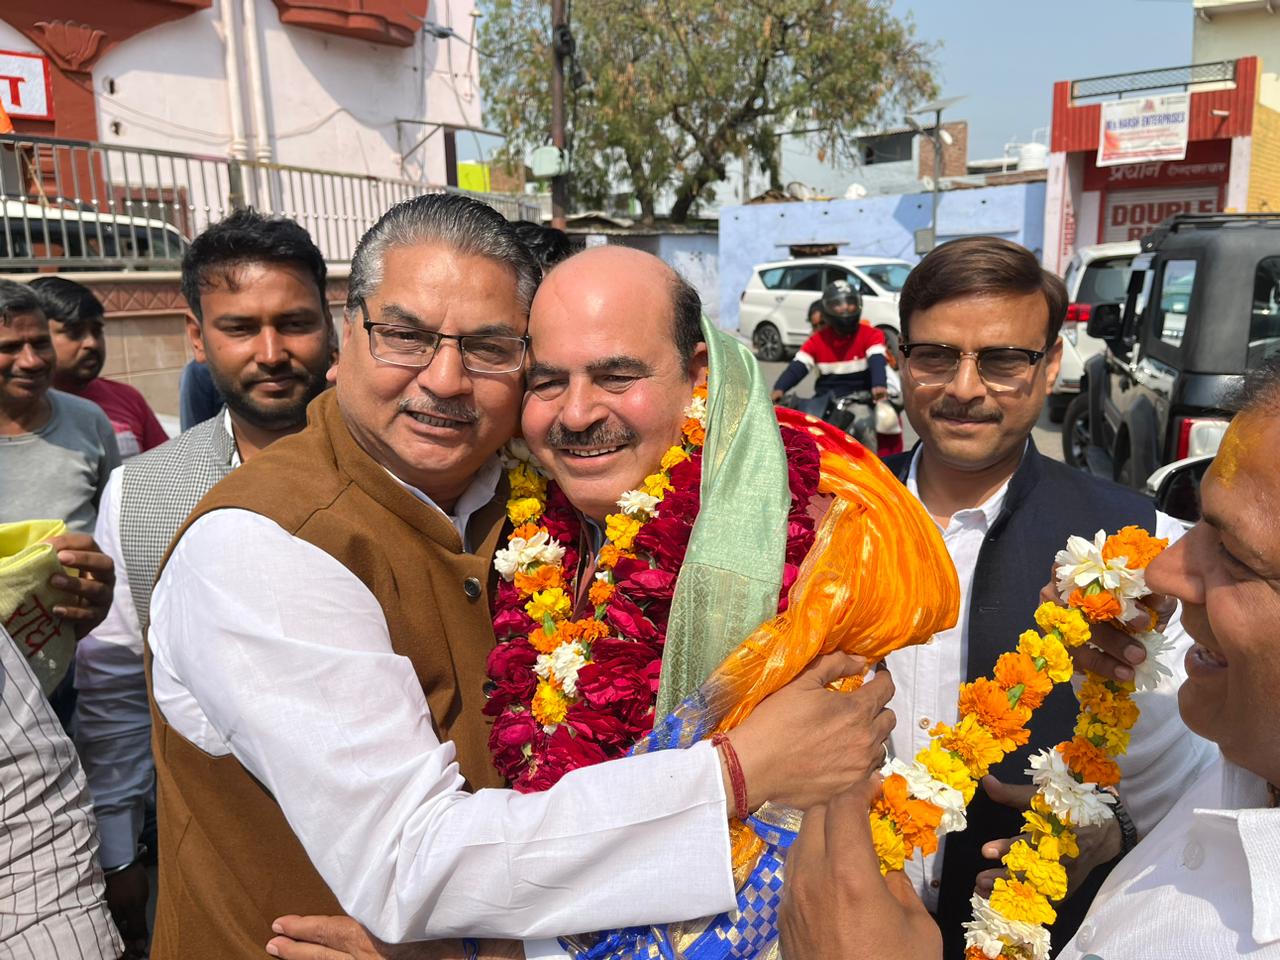 Elected Rajya Sabha member Chaudhary Tejveer Singh reached Mathura for the first time after being elected MP